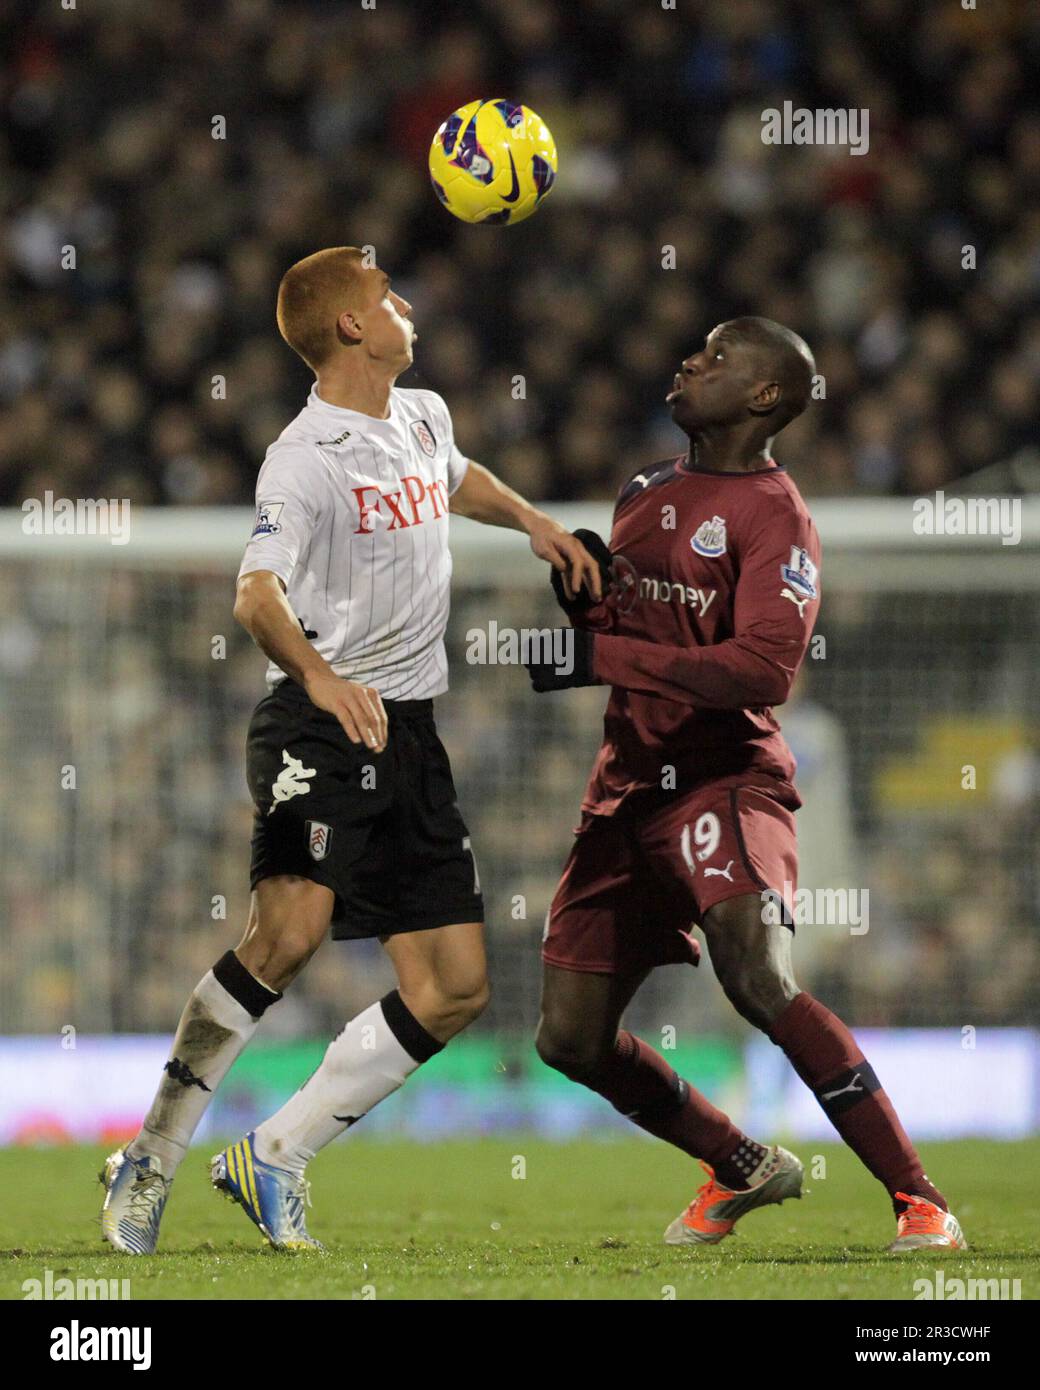 Fulham's Steve Sidwell batte con Newcastle United's Demba Ba.Fulham Beat Newcastle United 2:1Fulham 10/12/12 Fulham V Newcastle United 10/12/12 The Foto Stock